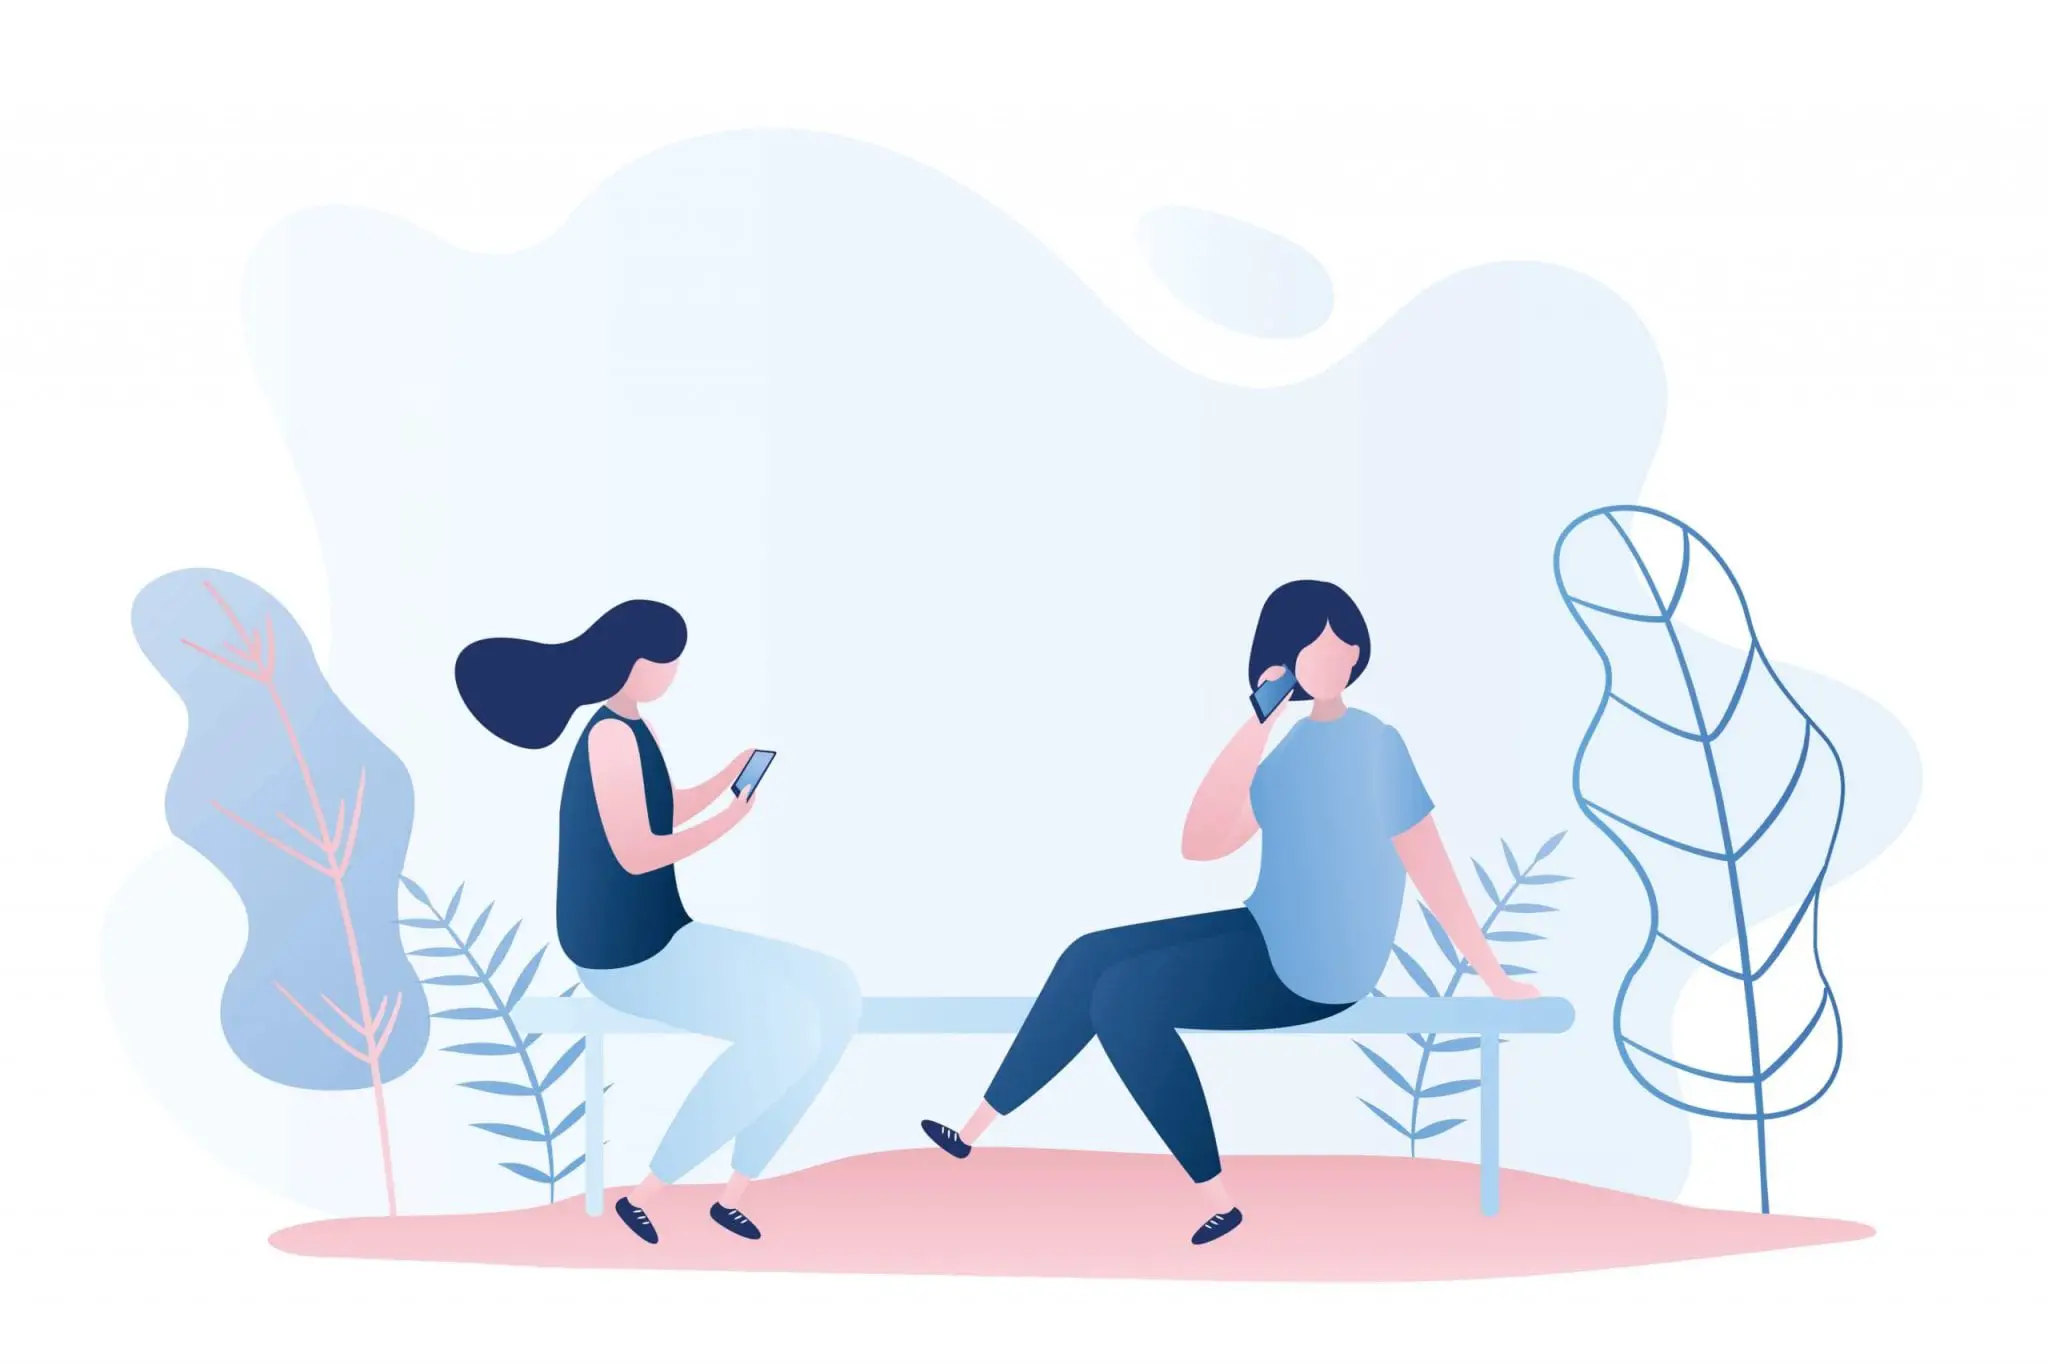 Two Girls Sitting on Bench, Female Characters With Smartphones, Trendy Style Vector Illustration